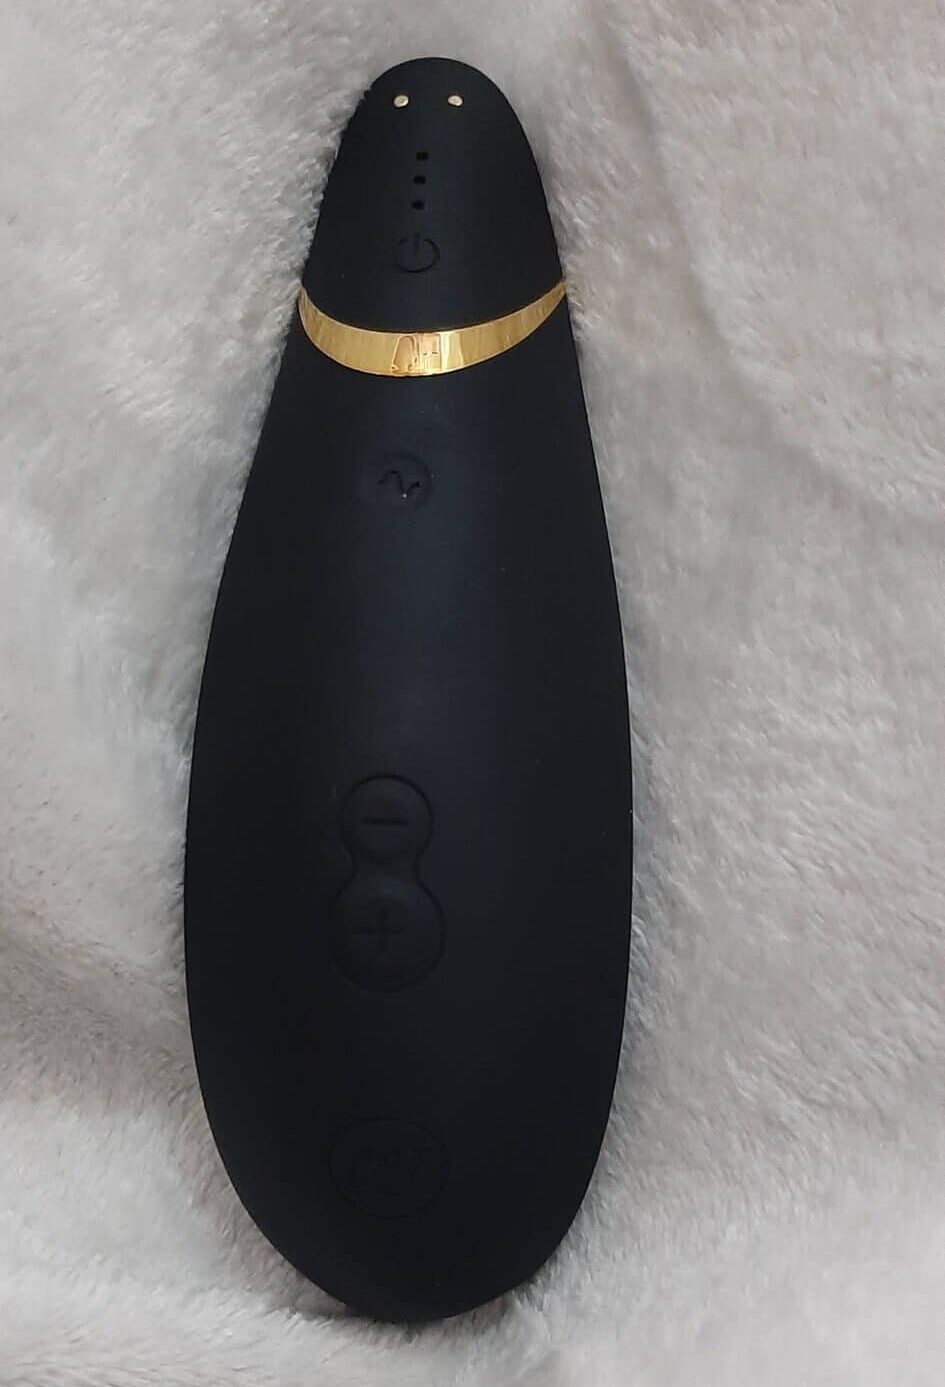 Womanizer Premium  The Womanizer Premium : Standout Quality or Shortcomings?